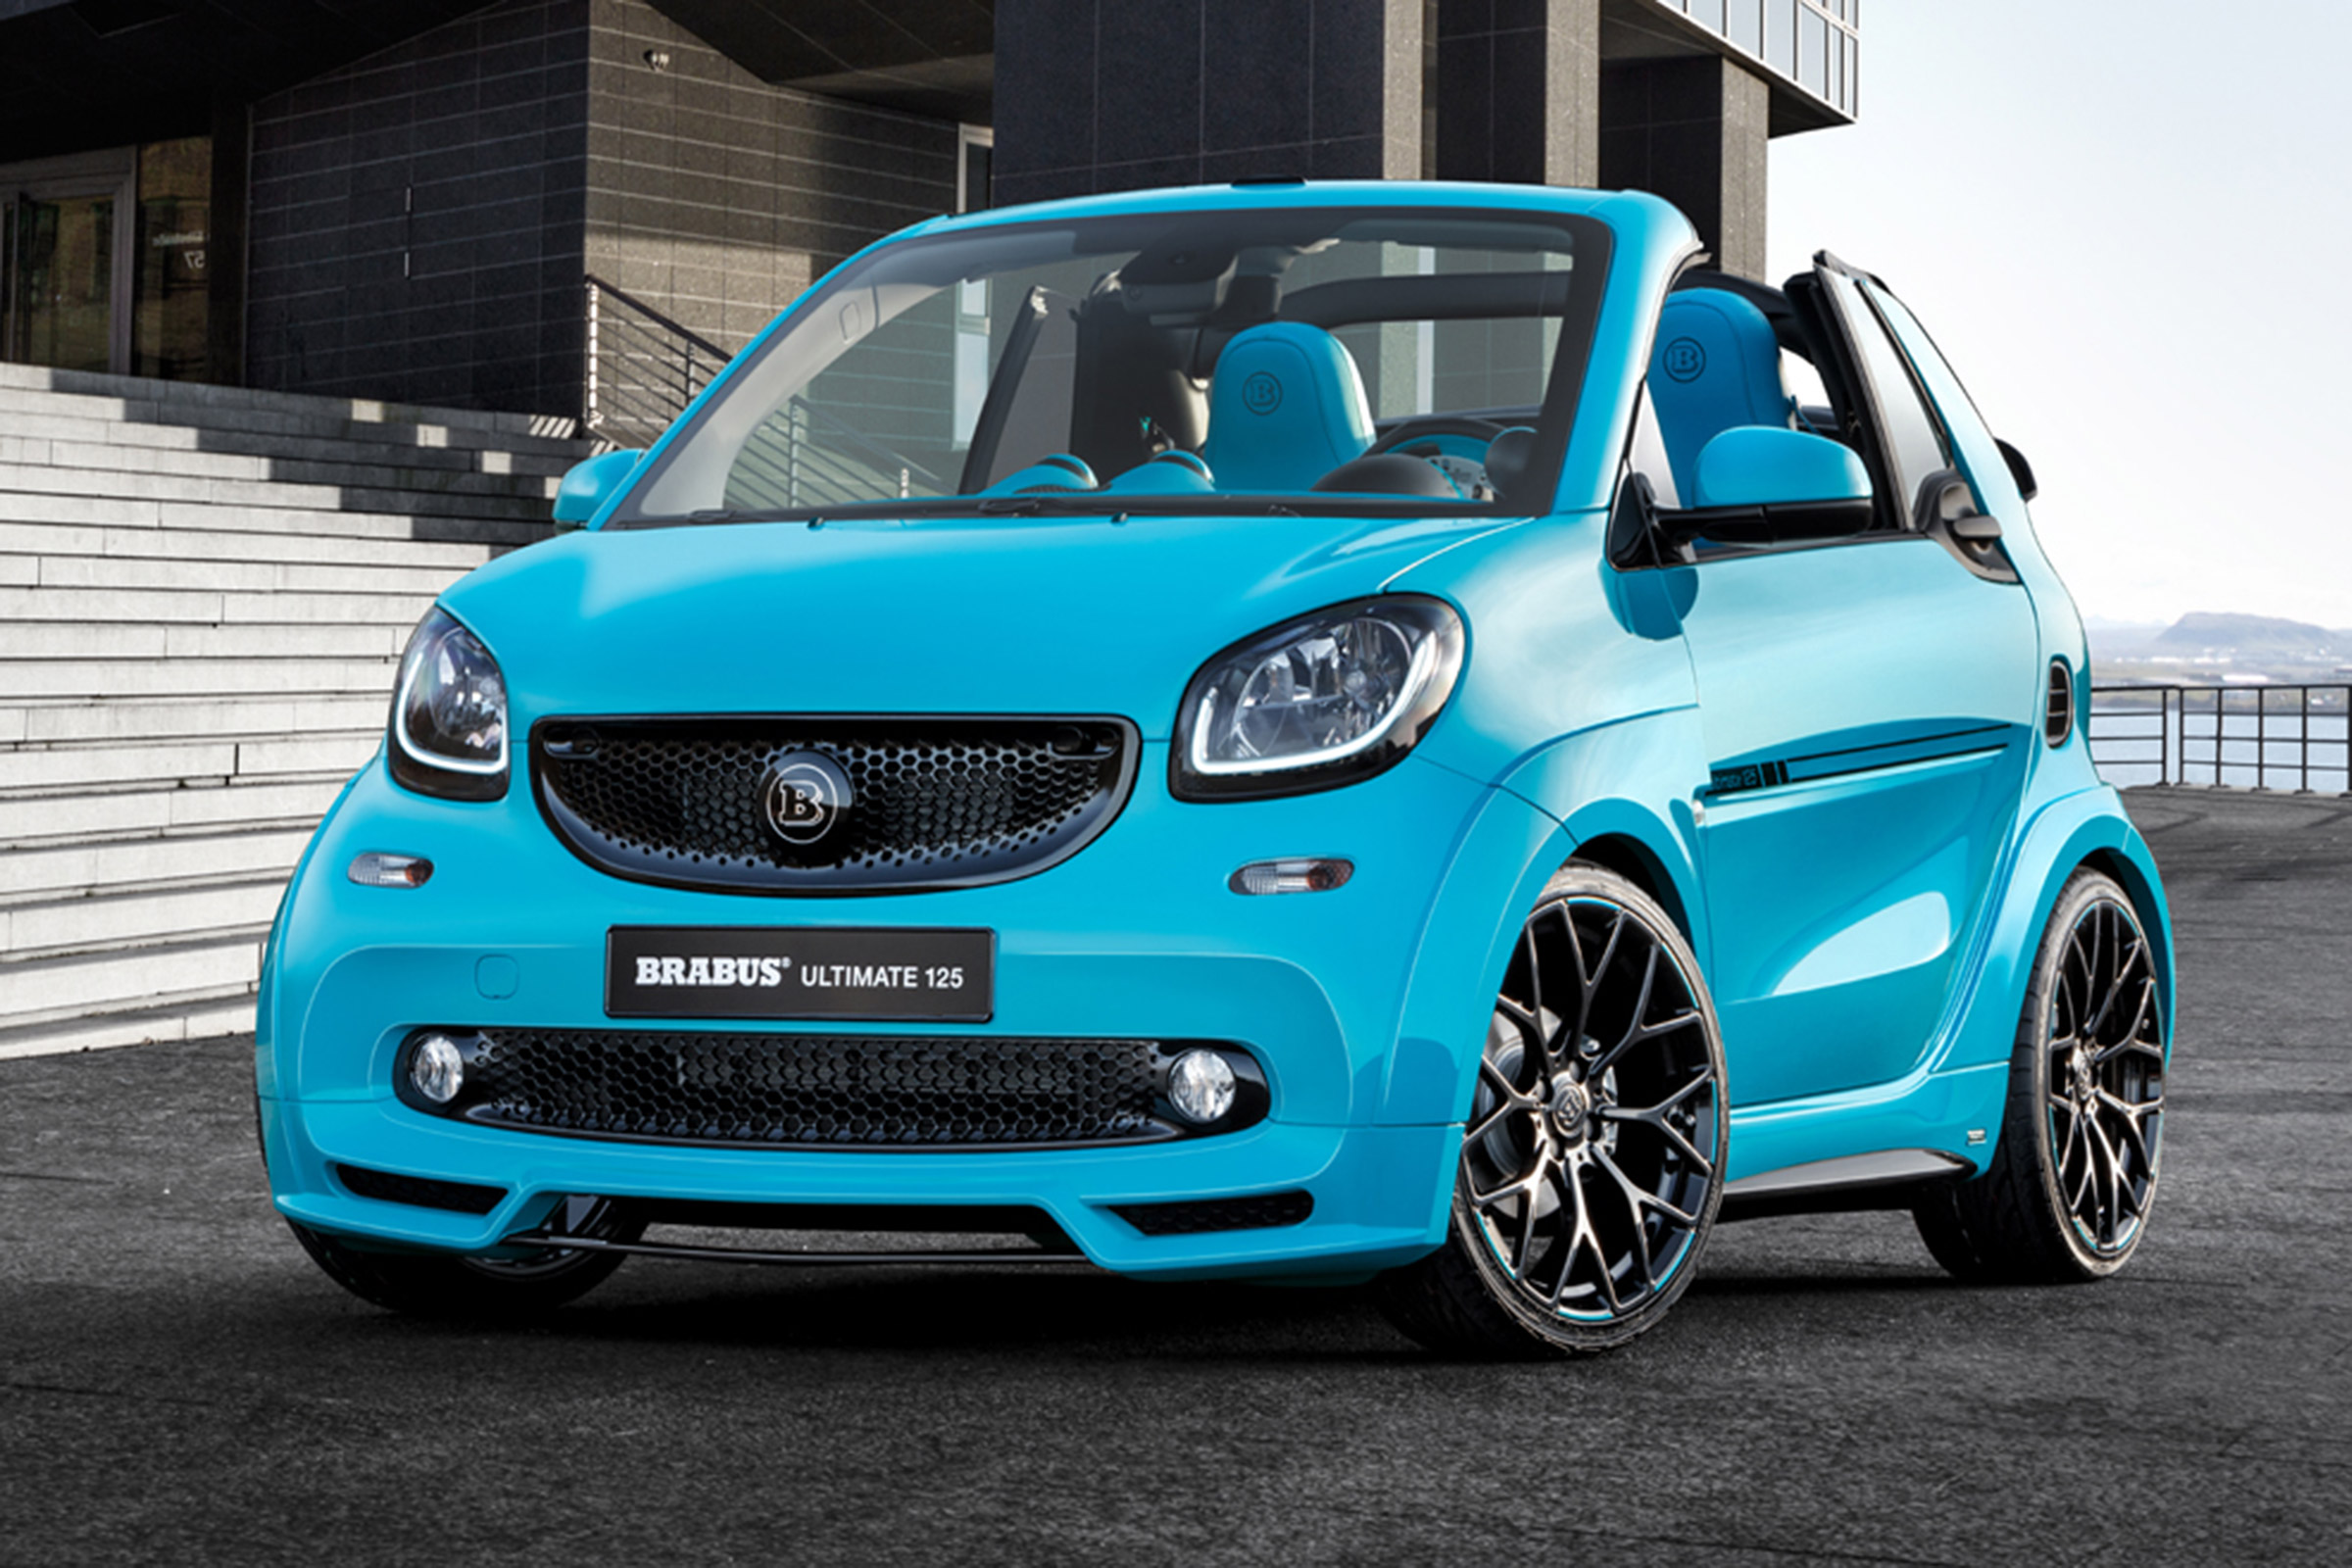 Brabus turns Smart Fortwo into Ultimate 125 costing £ 